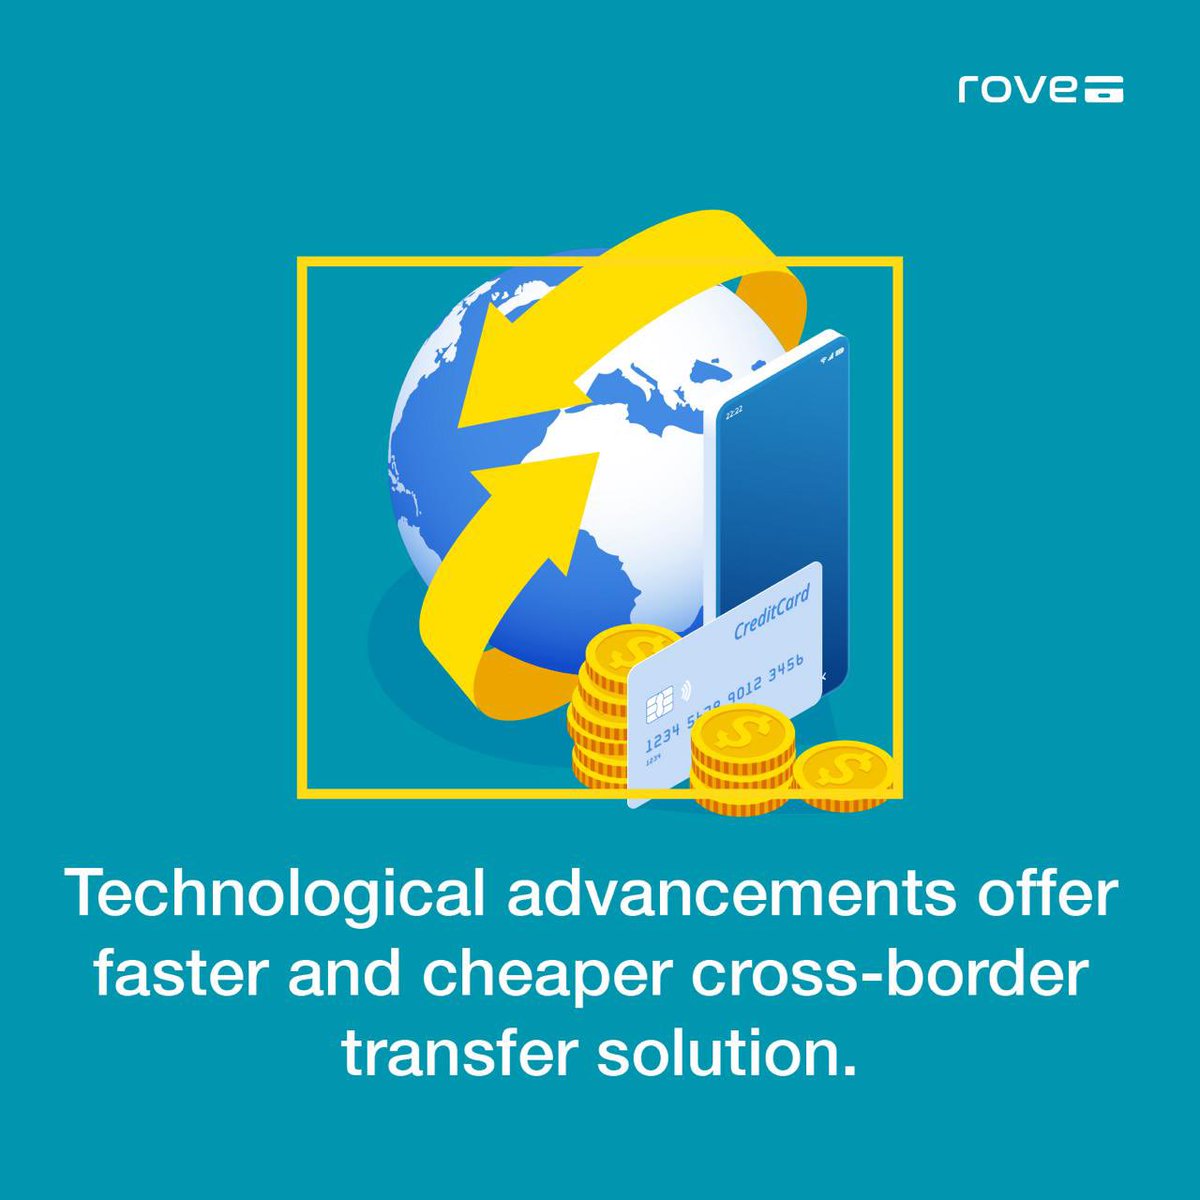 Empower your business with faster cross-border transfer solutions driven by technological advancements! 

Stay ahead of the curve and unlock new growth opportunities in the international market. 

#Rove10 #CrossBorder #TechnologicalAdvancements #GlobalFinance #Innovation